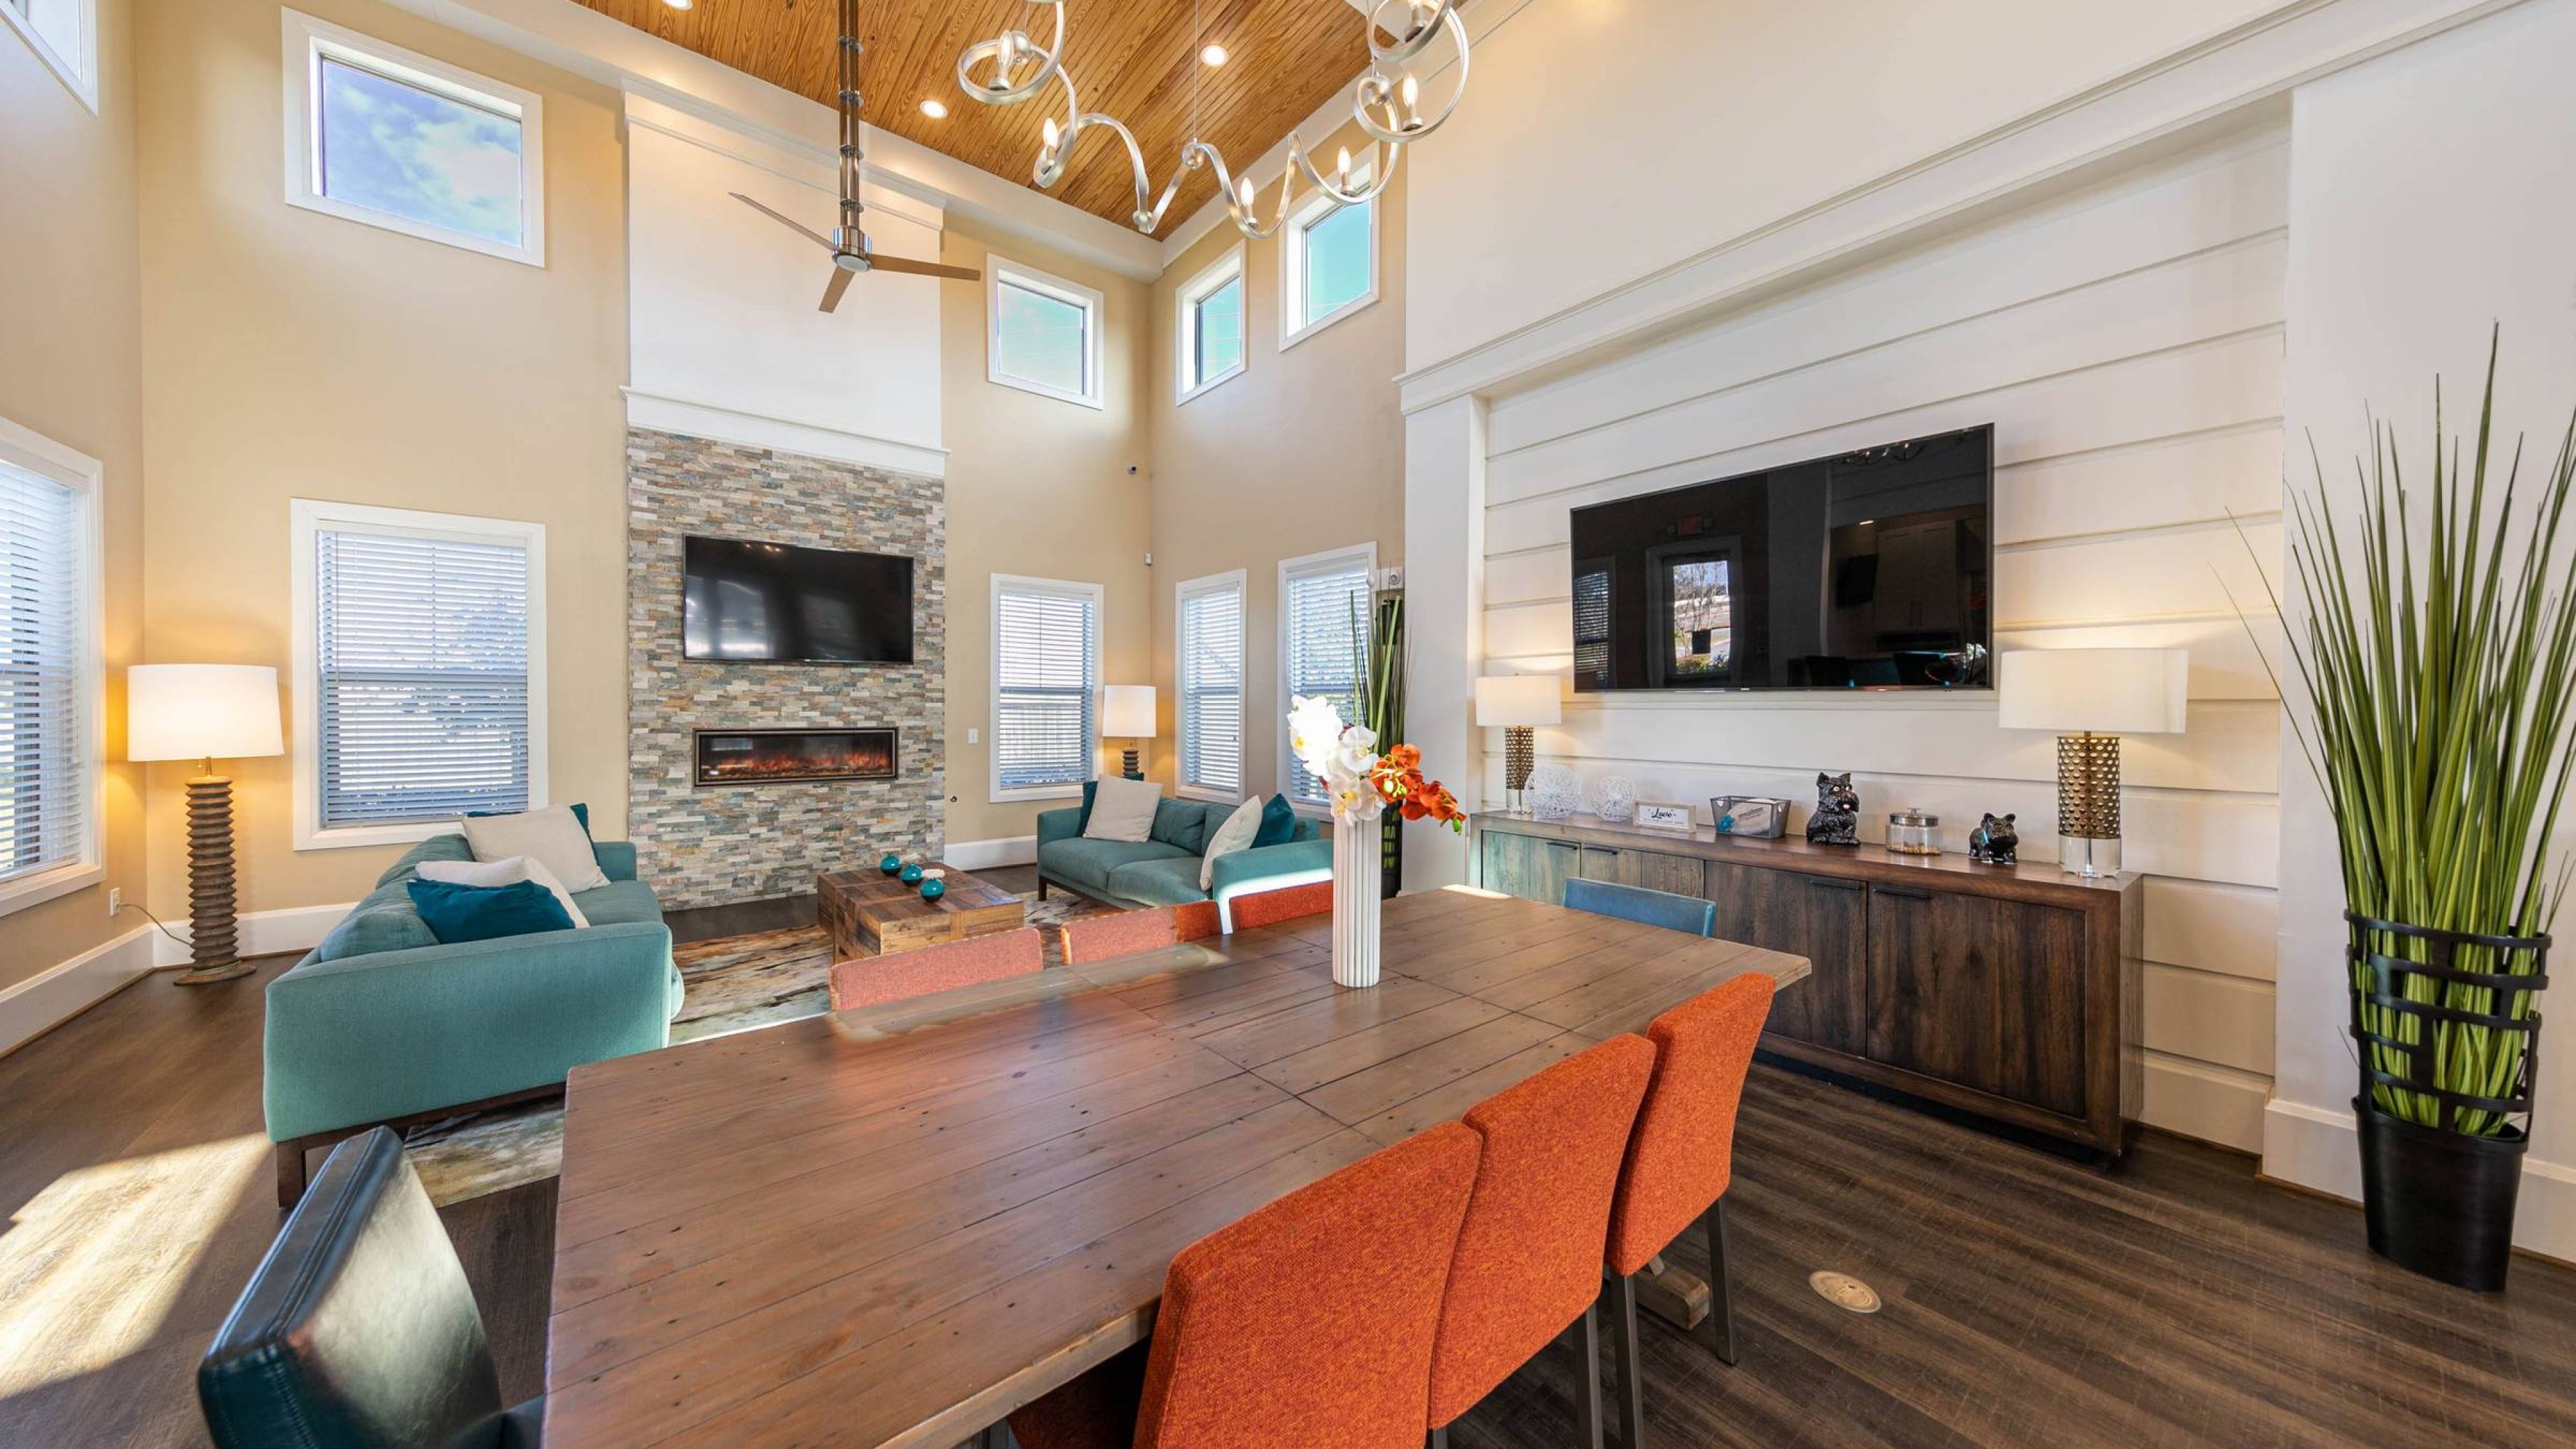 Hawthorne at Crenshaw resident clubhouse with fireplace, seating, and large screen TV